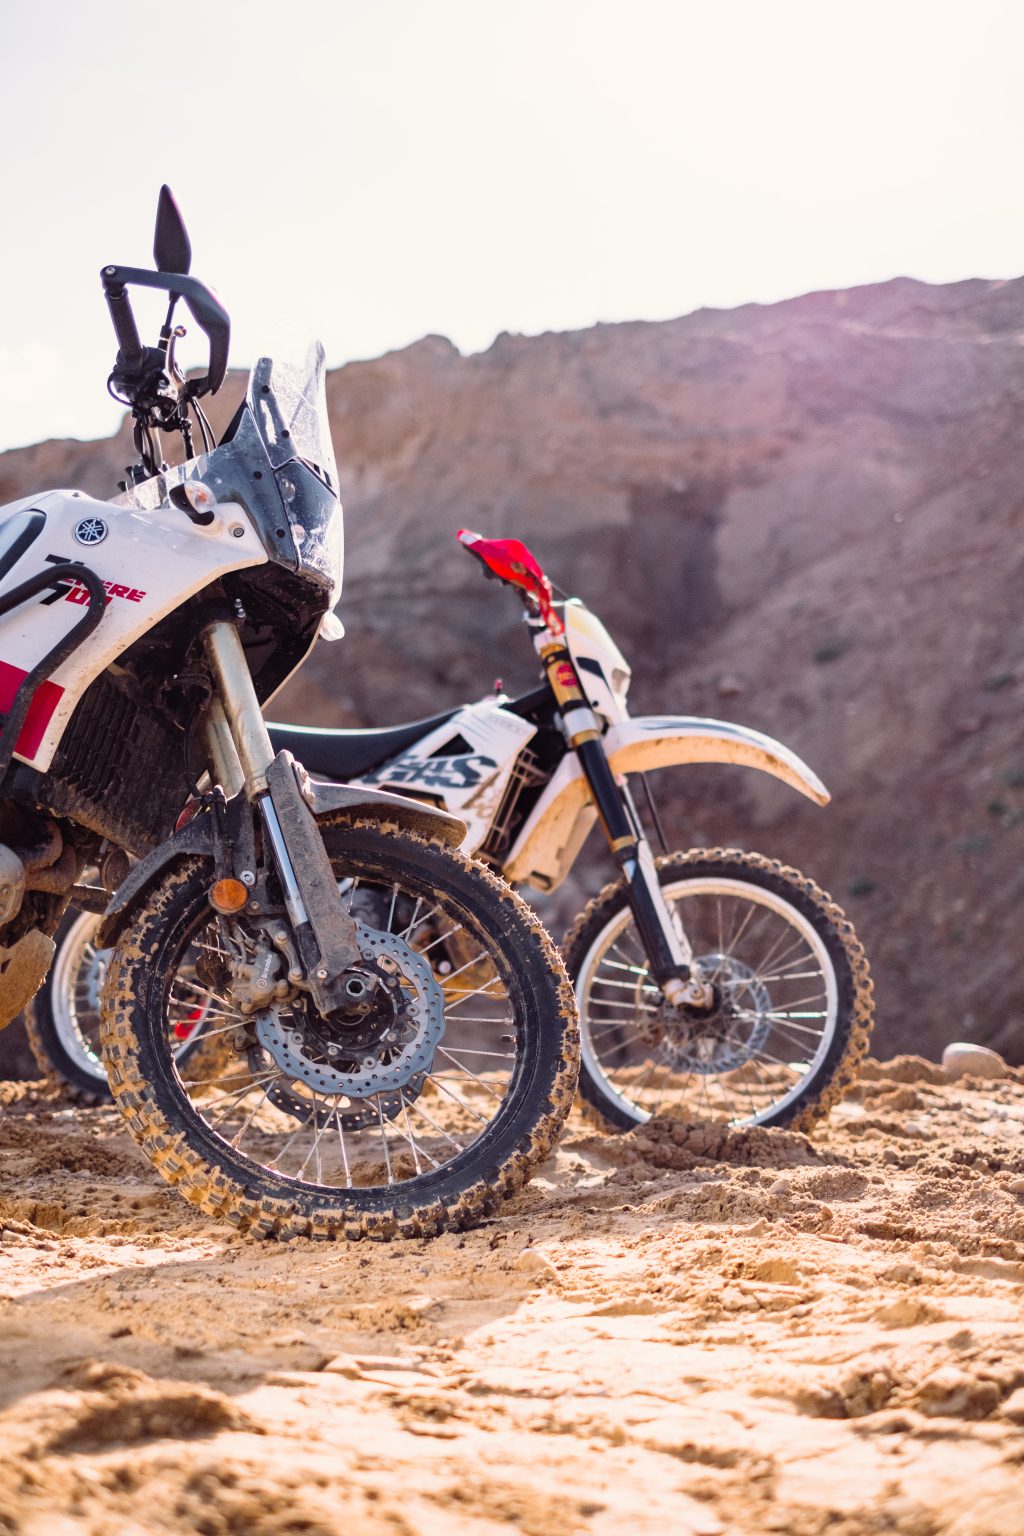 Two motorbikes at a sand quarry details 2 - free stock photo